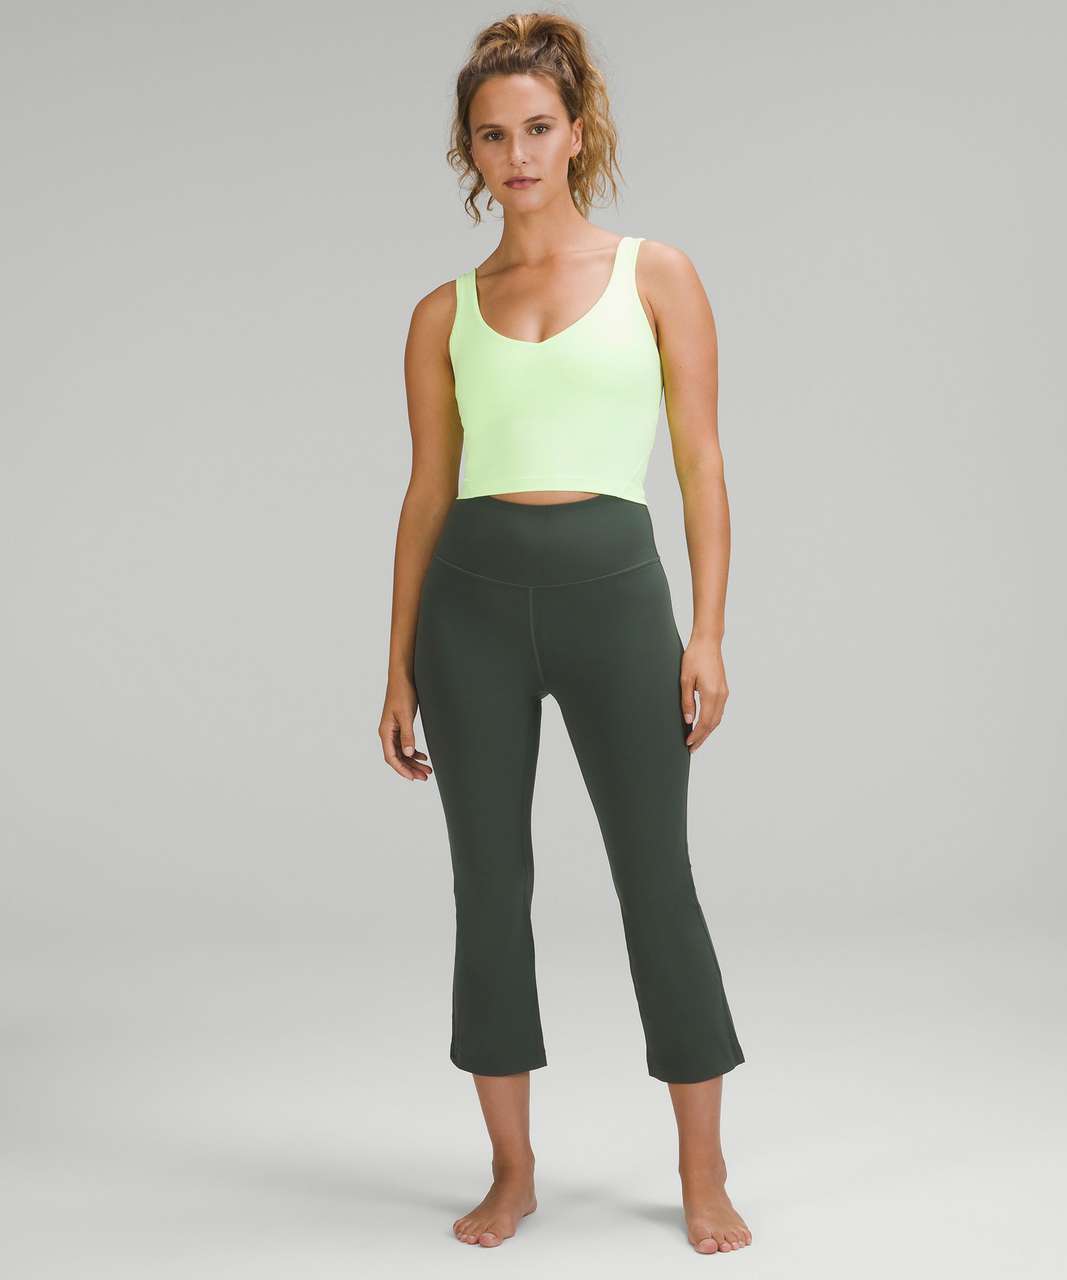 Lululemon Groove Super-High-Rise Crop 23" - Smoked Spruce